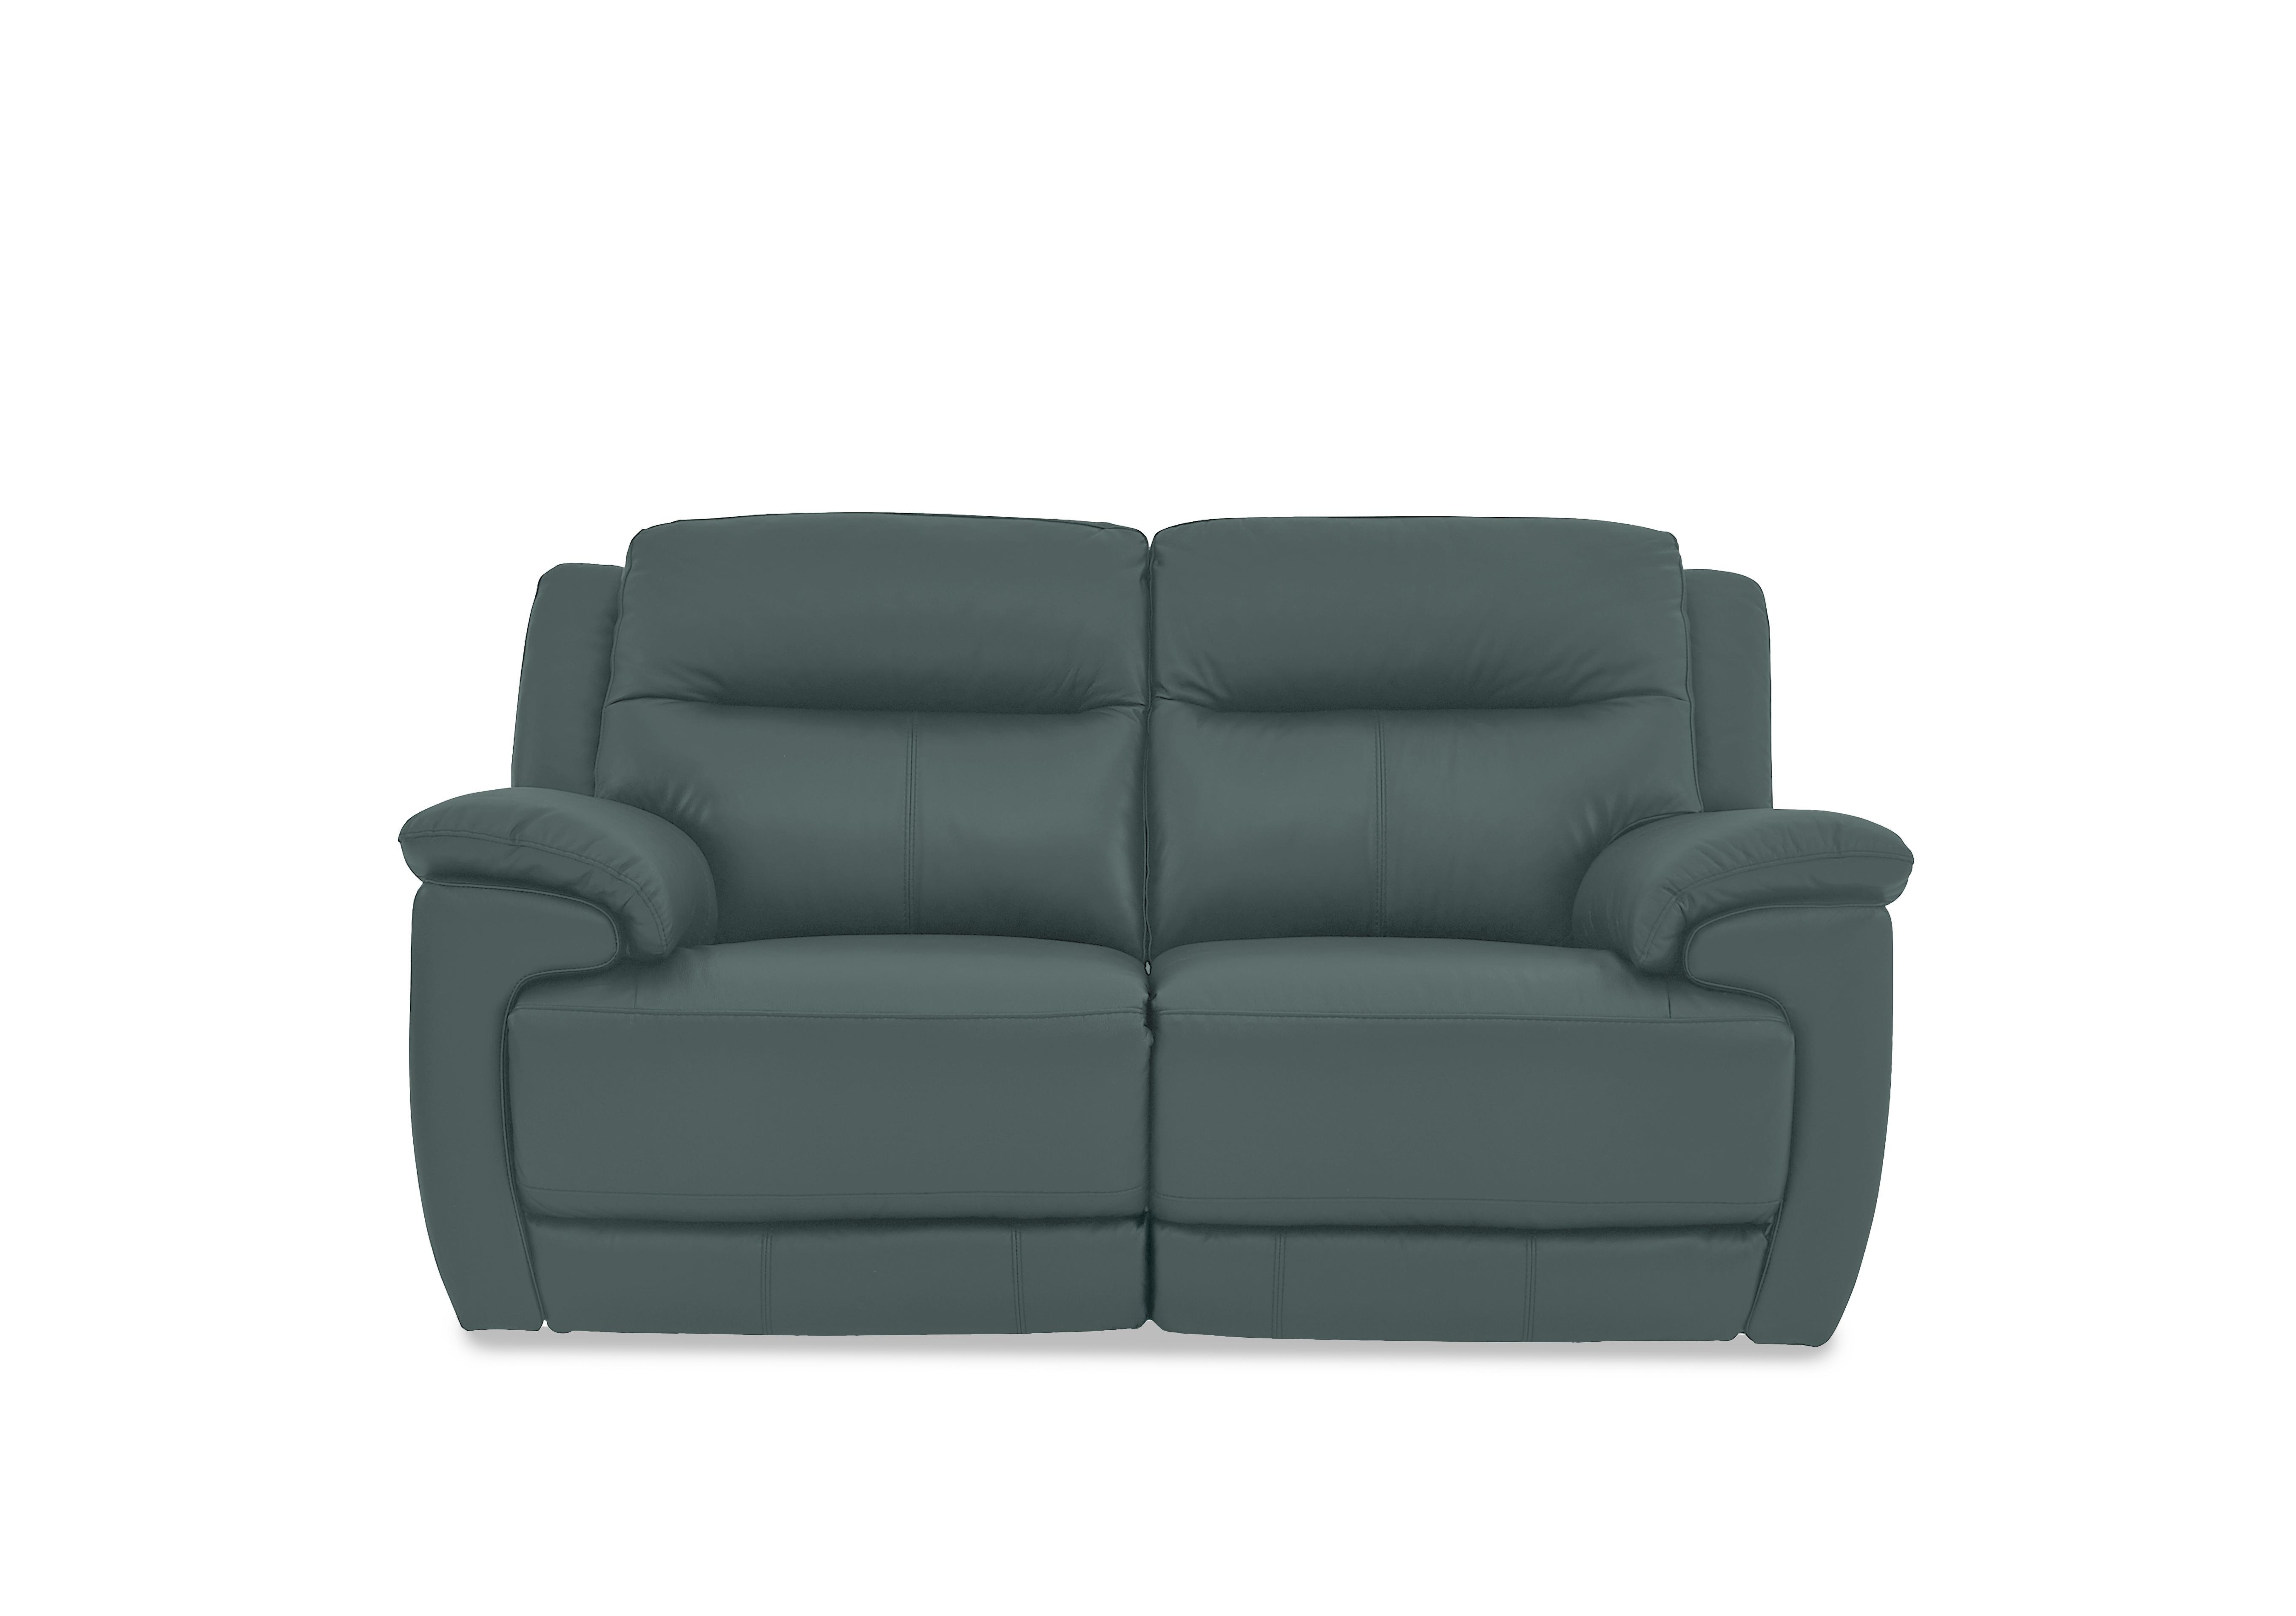 Touch 2 Seater Leather Sofa in Bv-301e Lake Green on Furniture Village